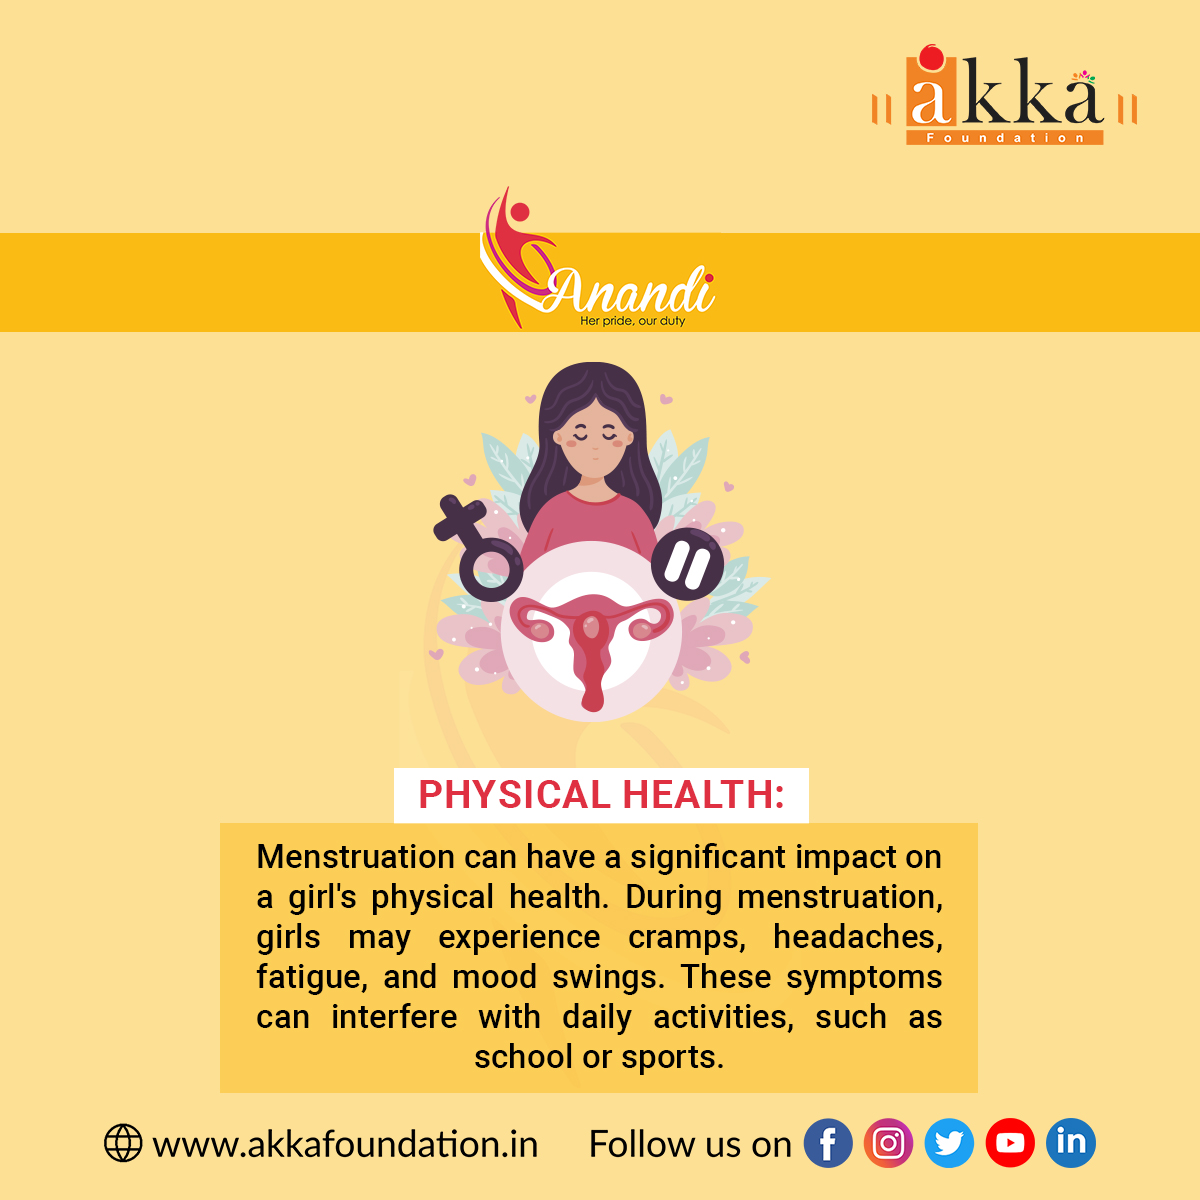 'Periods don't just happen in the body, they also impact the mind and soul: The many ways menstruation affects a girl's life.'

#AkkaFoundation #projectanandi #Anandi #menstruation #cycle #periods #health #hygiene #education #reforms #anemia #latur #nilanga